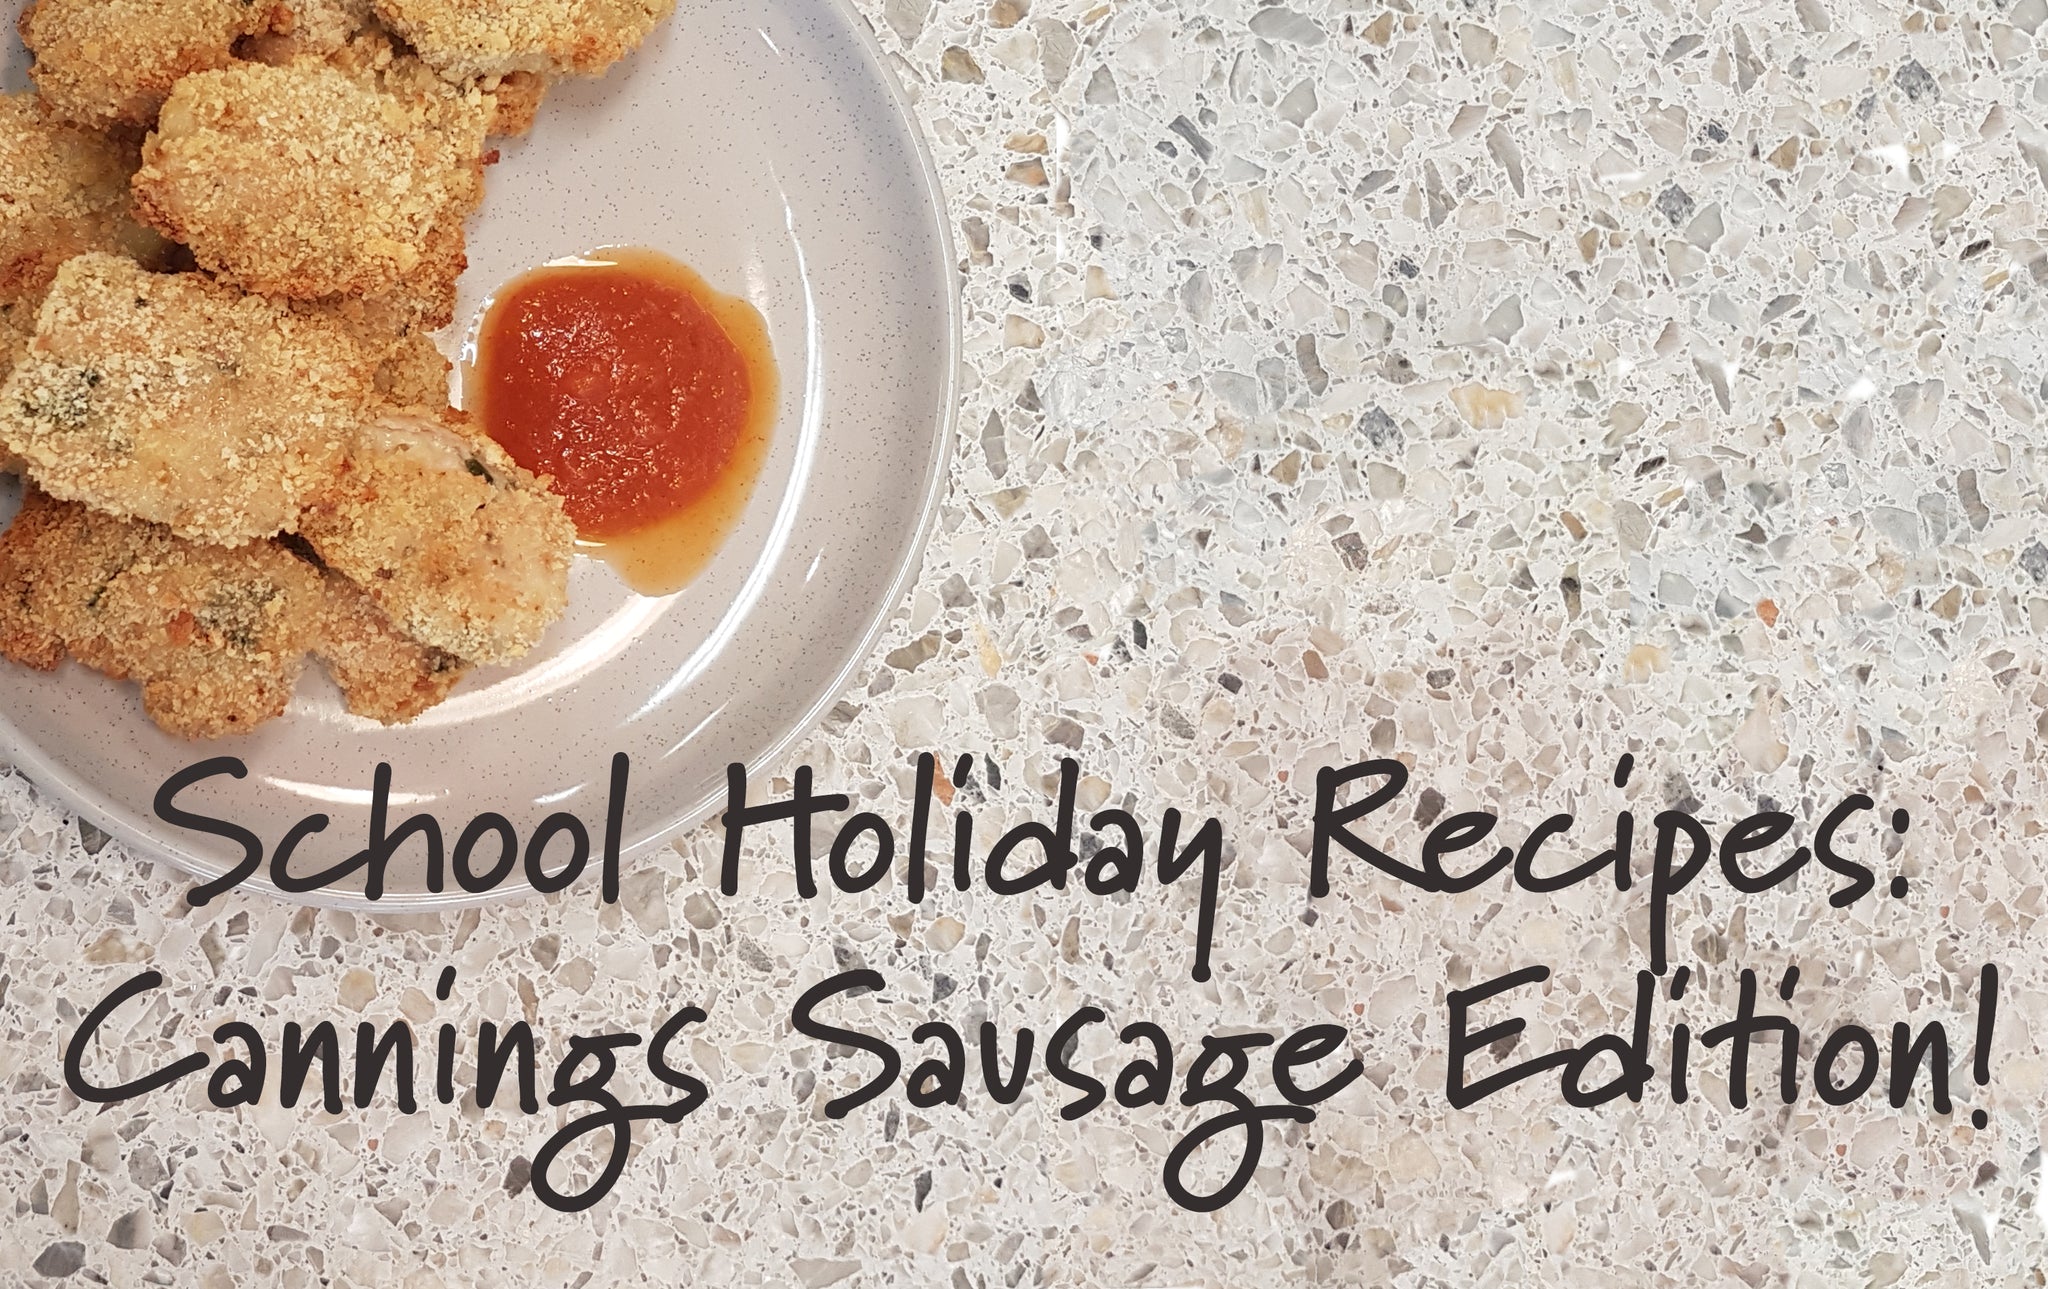 Easy Kid-Friendly School Holiday Recipes Using Cannings Sausages!